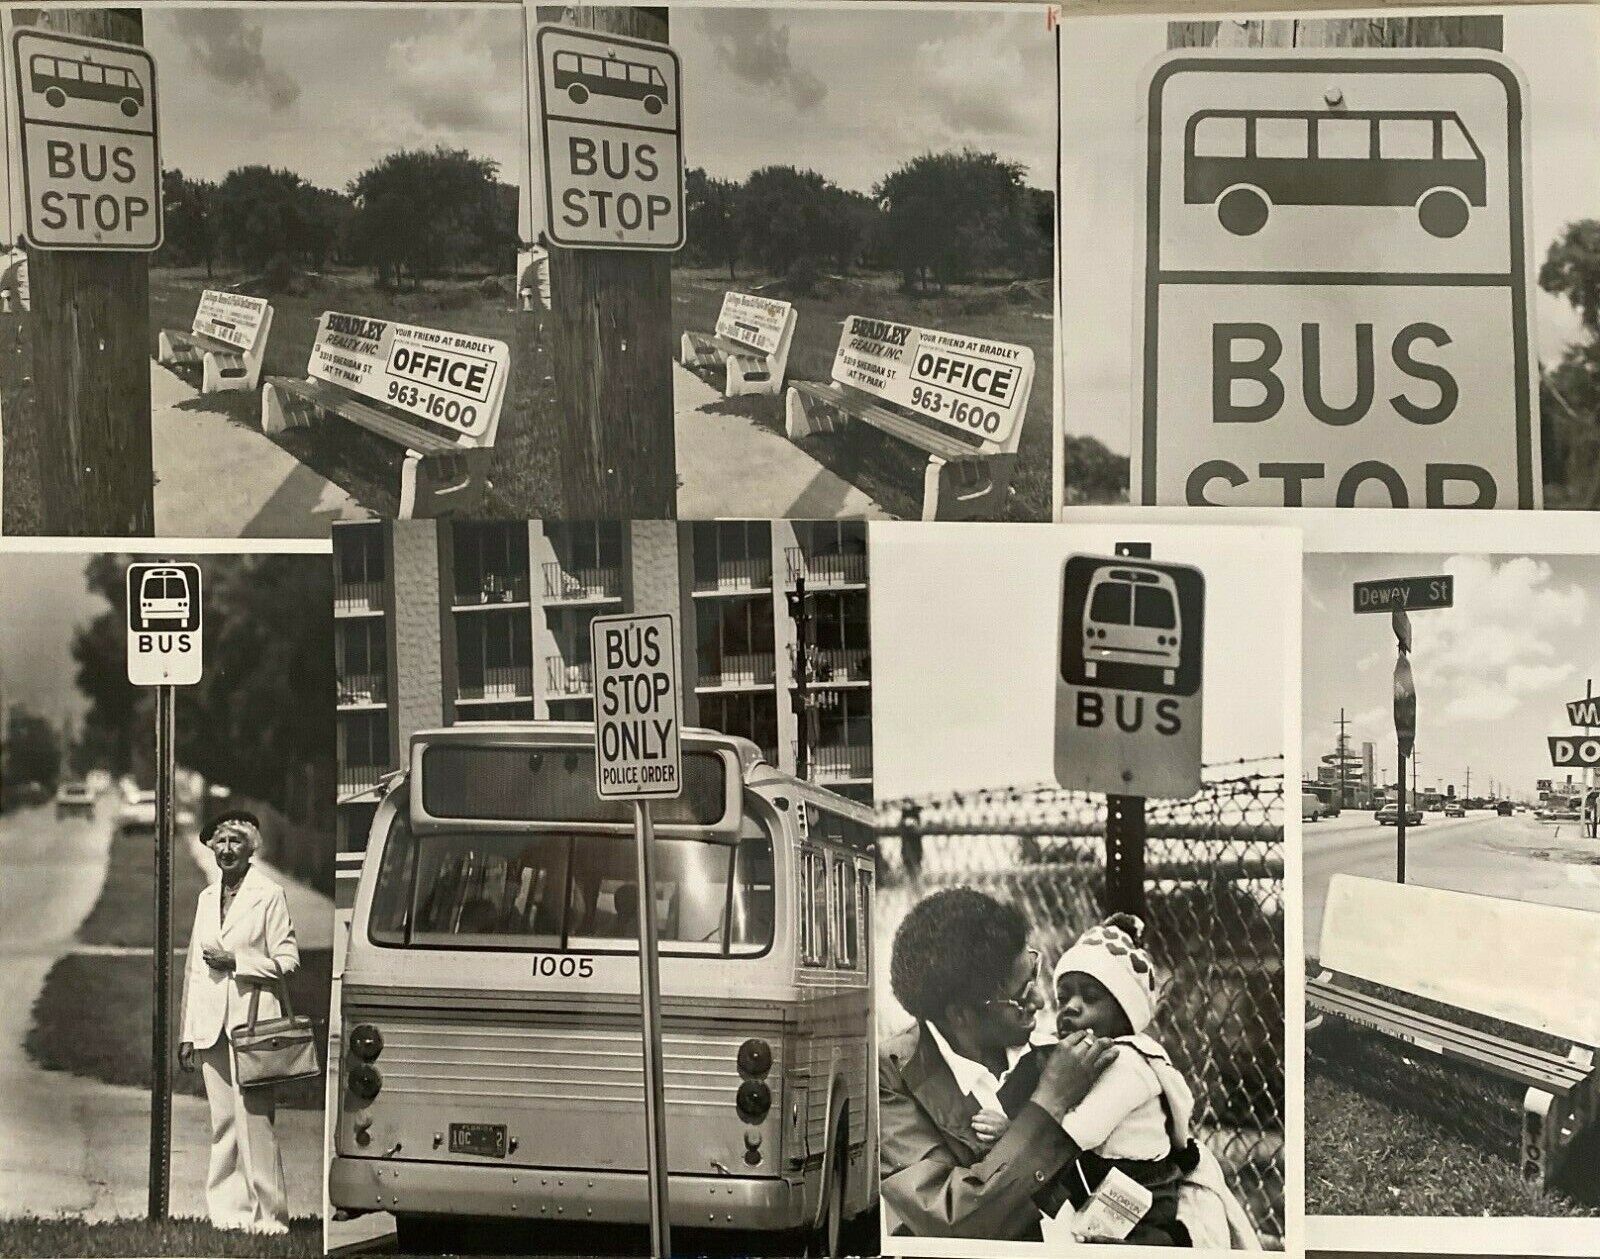 LG17-116 1970-1990s MISC FLORIDA BUS STOPS PHOTO LOT 14 pc Vtg B&w Orig + Wire